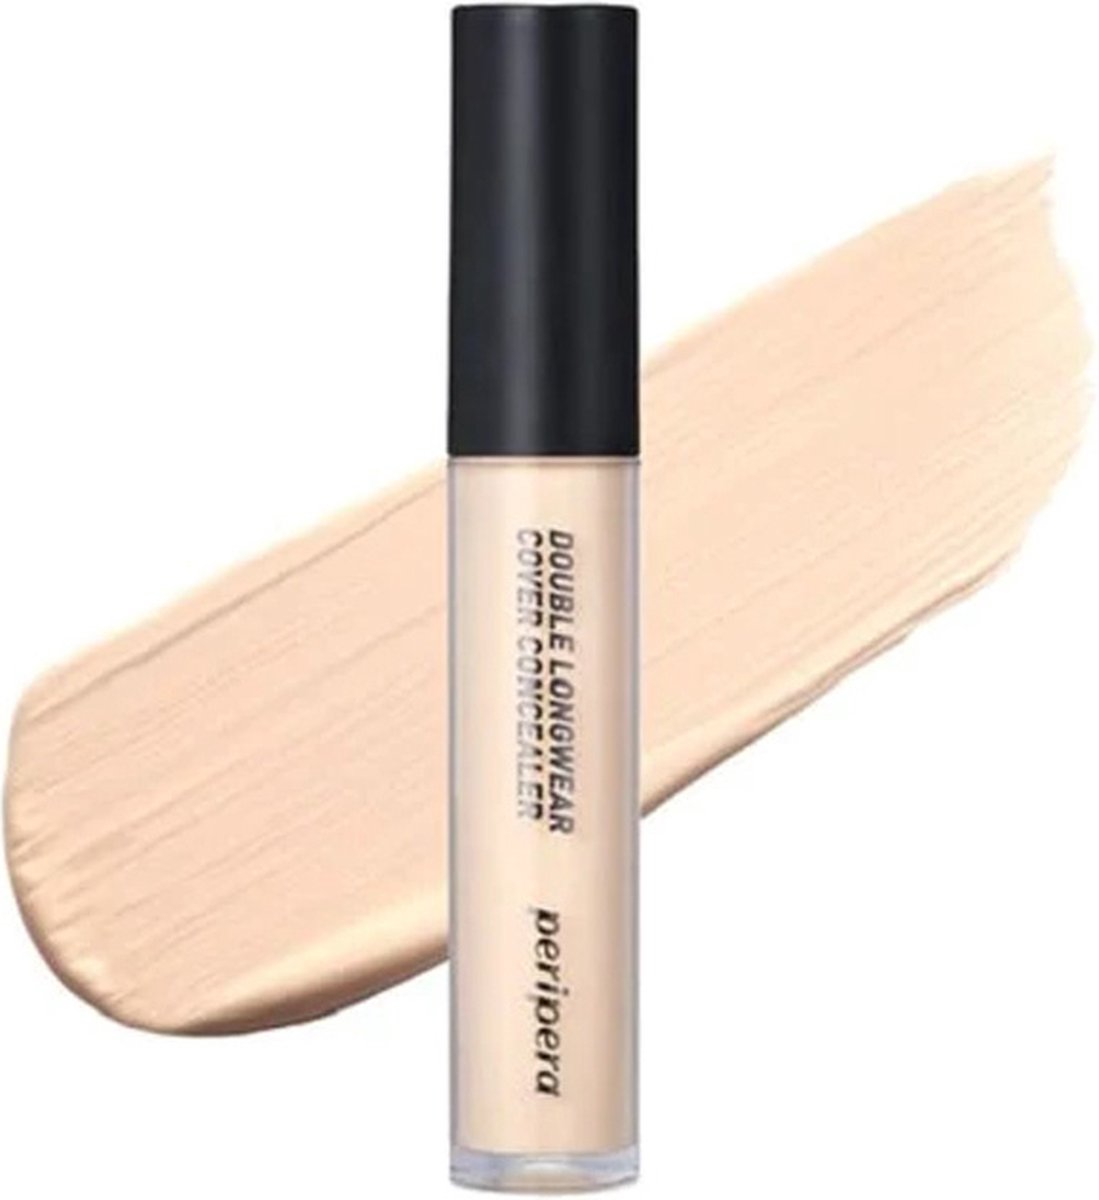 Peripera Double Longwear Cover Concealer 02 Natural Beige 5.5g